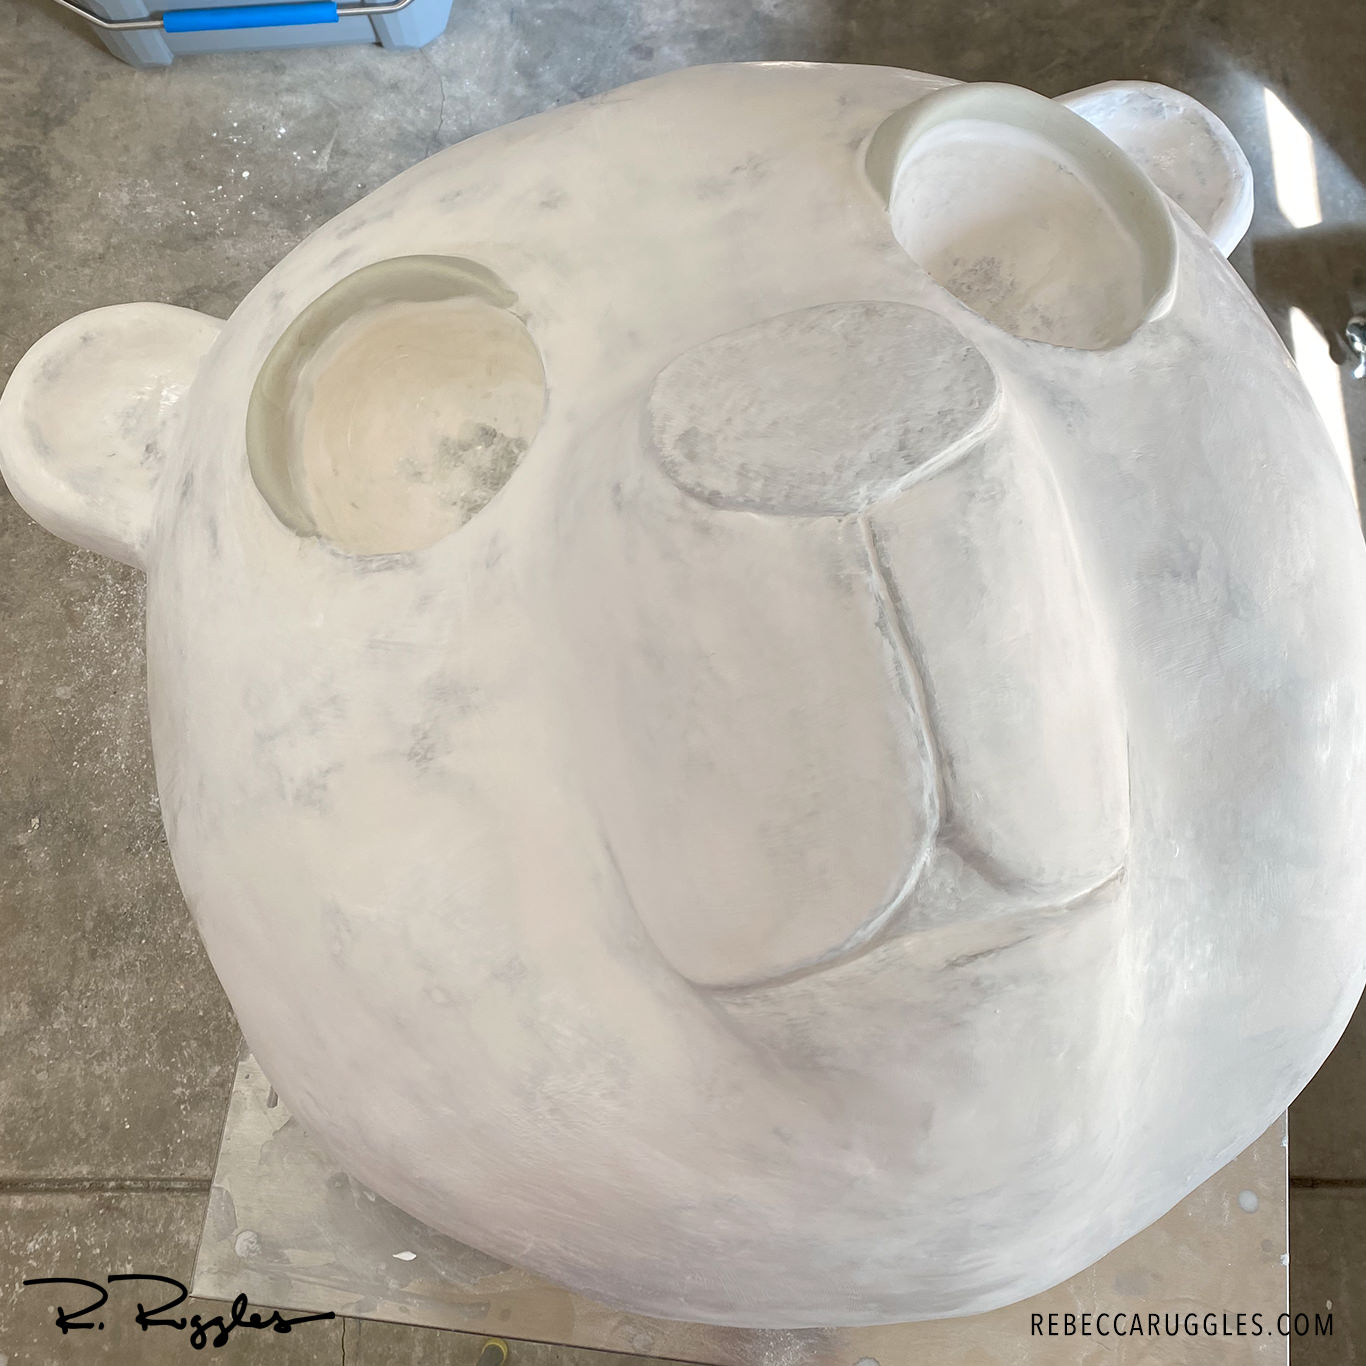 Eyelids added to the panda head sculpture with magic sculpt epoxy clay.